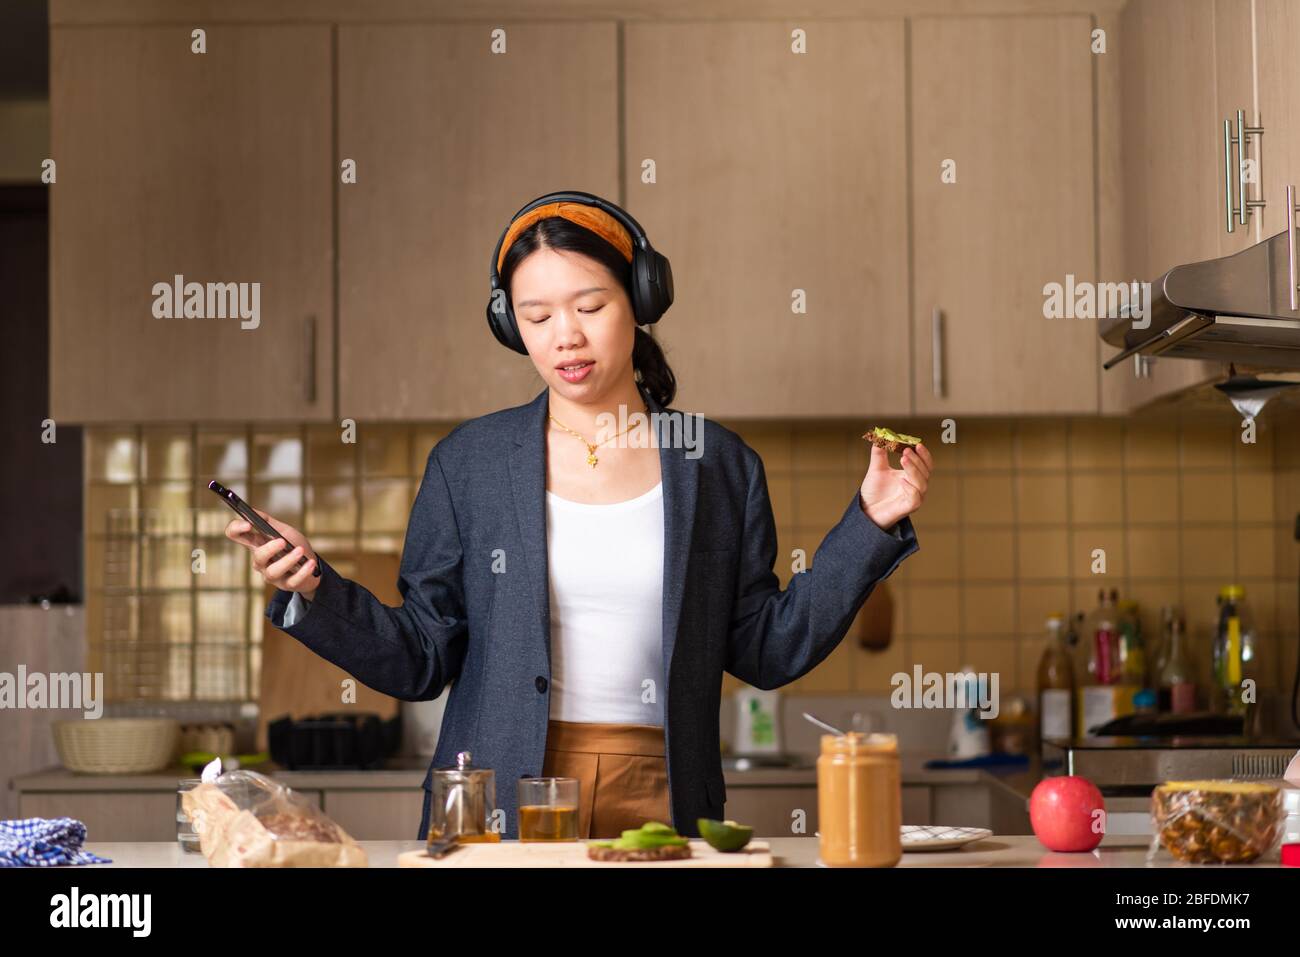 Cheerful woman fooling around in the kitchen after spending too much time indoors Stock Photo